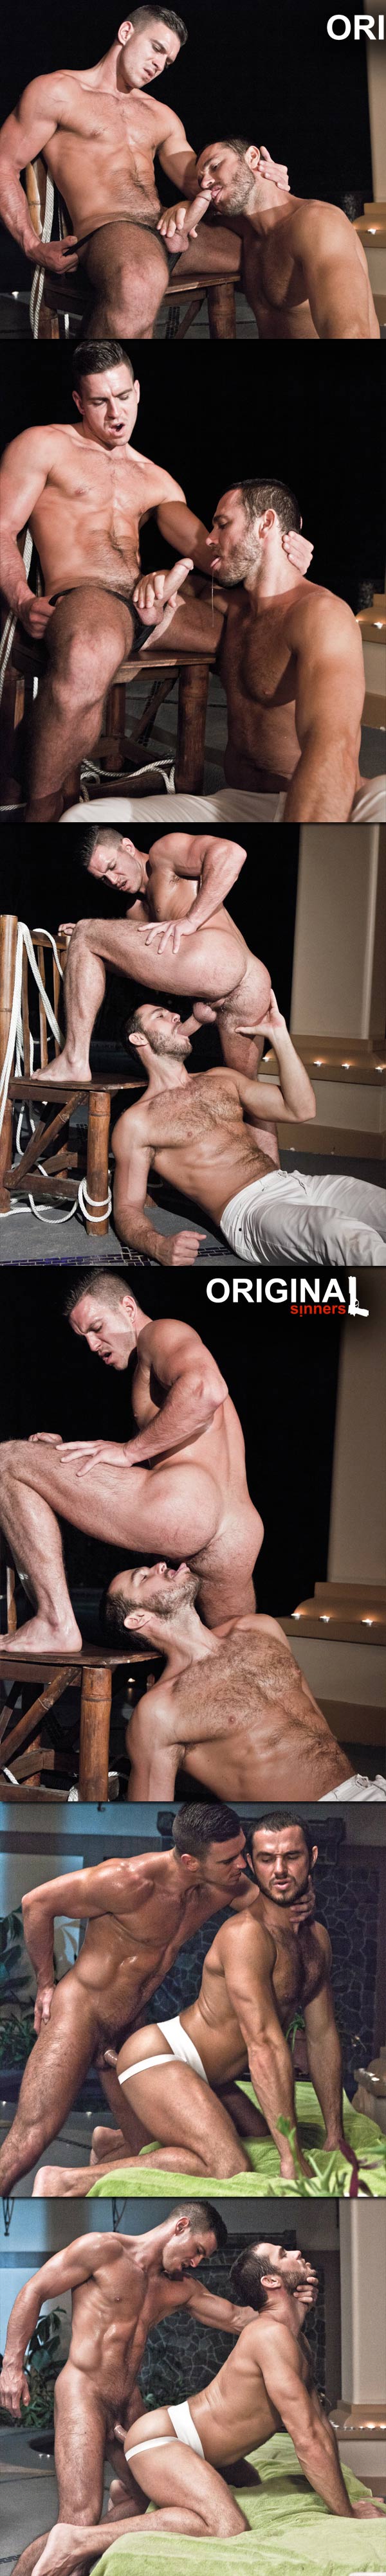 Original Sinners (Jessy Ares & Paddy O'Brian) (Scene 5) at LucasEntertainment.com